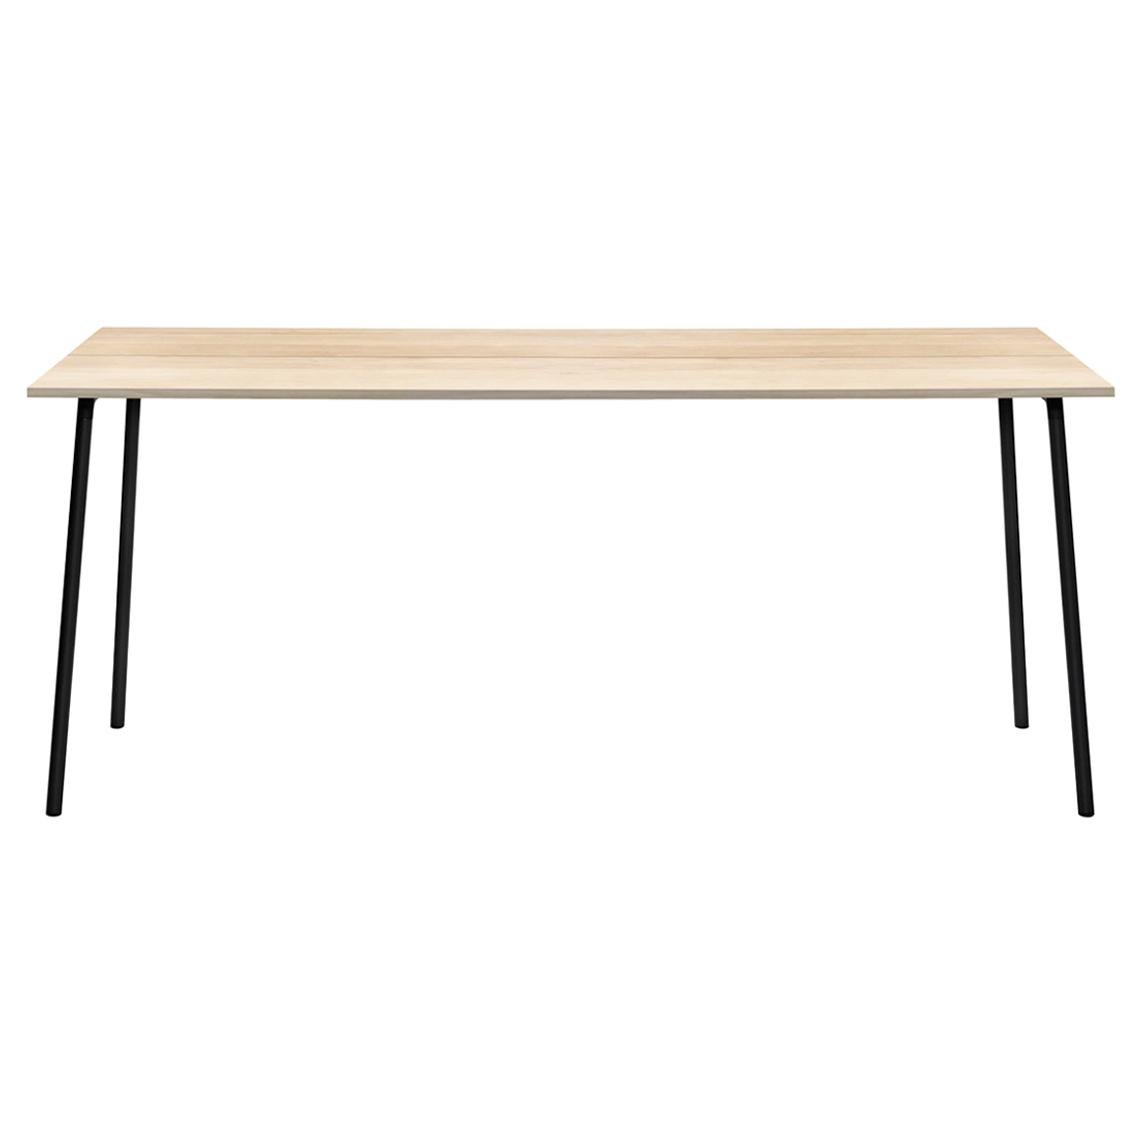 Emeco Run 96" High Table in Accoya with Black Frame by Sam Hecht and Kim Colin